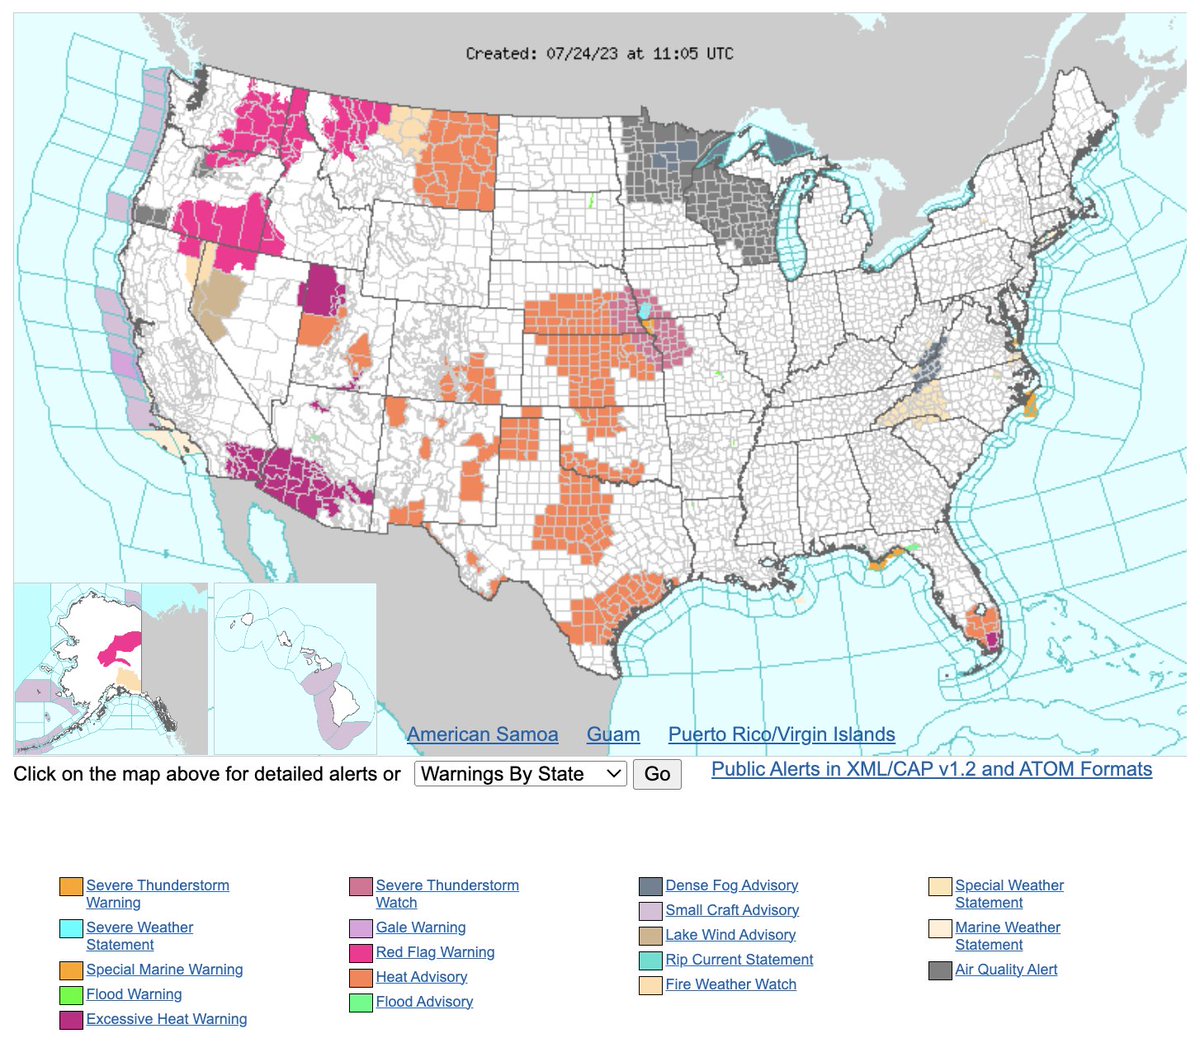 #Heat related hazards are in effect in many areas in the western half of the U.S. this morning, while air quality alerts cover much of #Minnesota and #Wisconsin.

View all U.S. weather hazards here: https://t.co/2Ao7ryR5hf https://t.co/LbLe8OzQwj